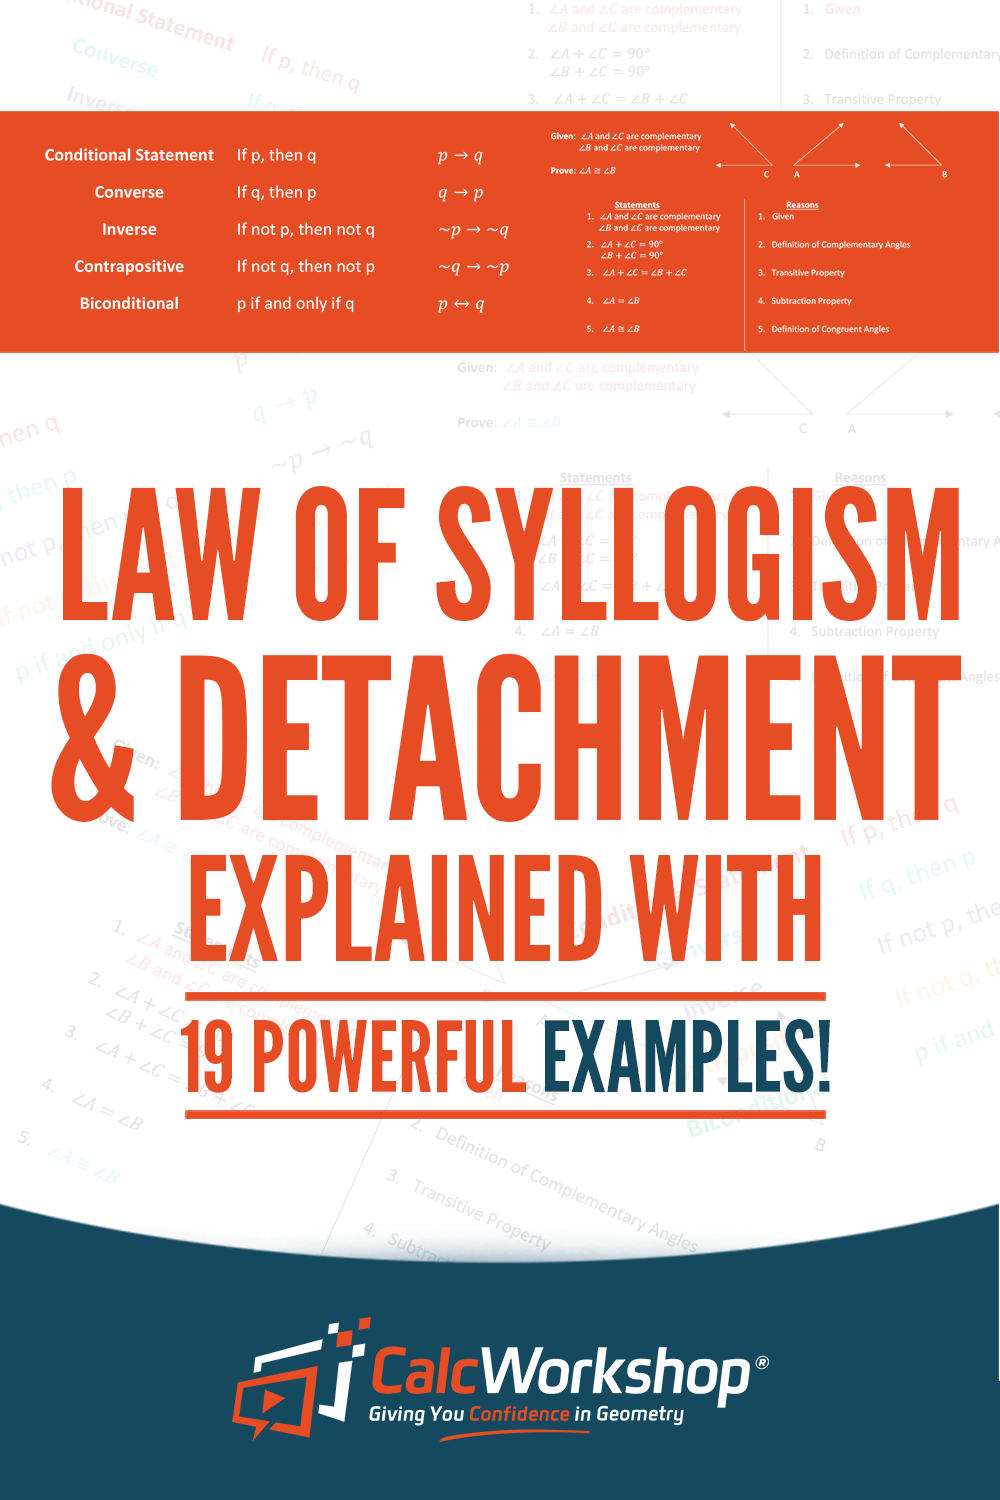 law-of-syllogism-detachment-explained-w-19-examples